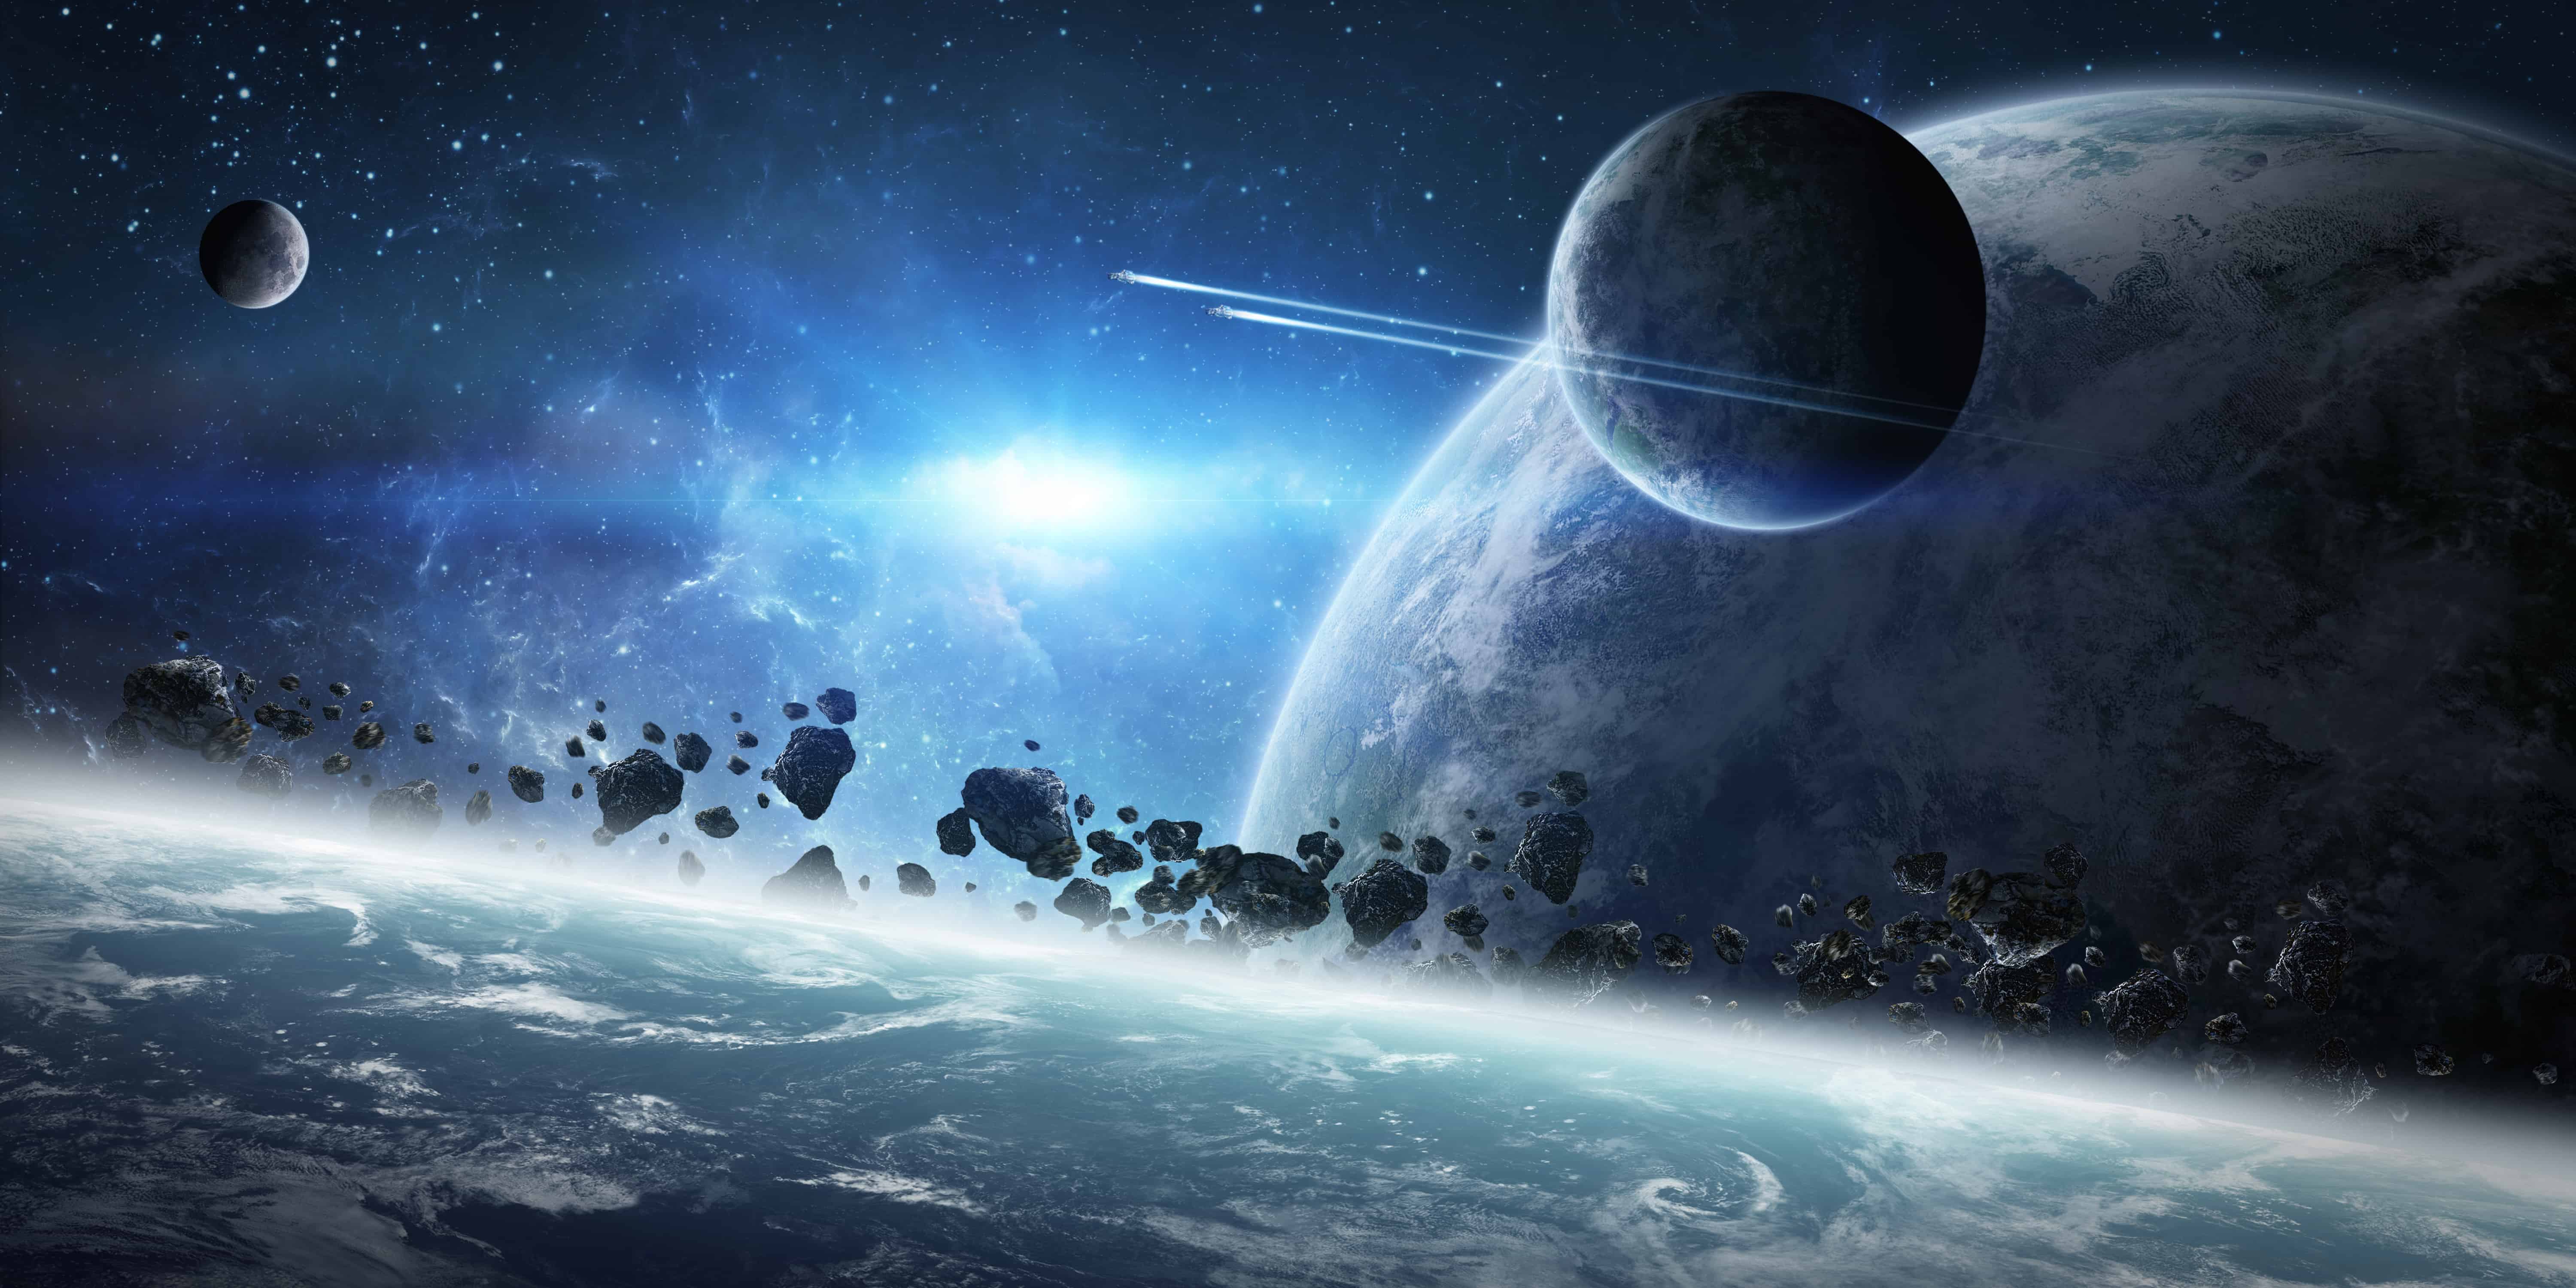 Did You Know? Unbelievable Facts about the Universe and Outer Space